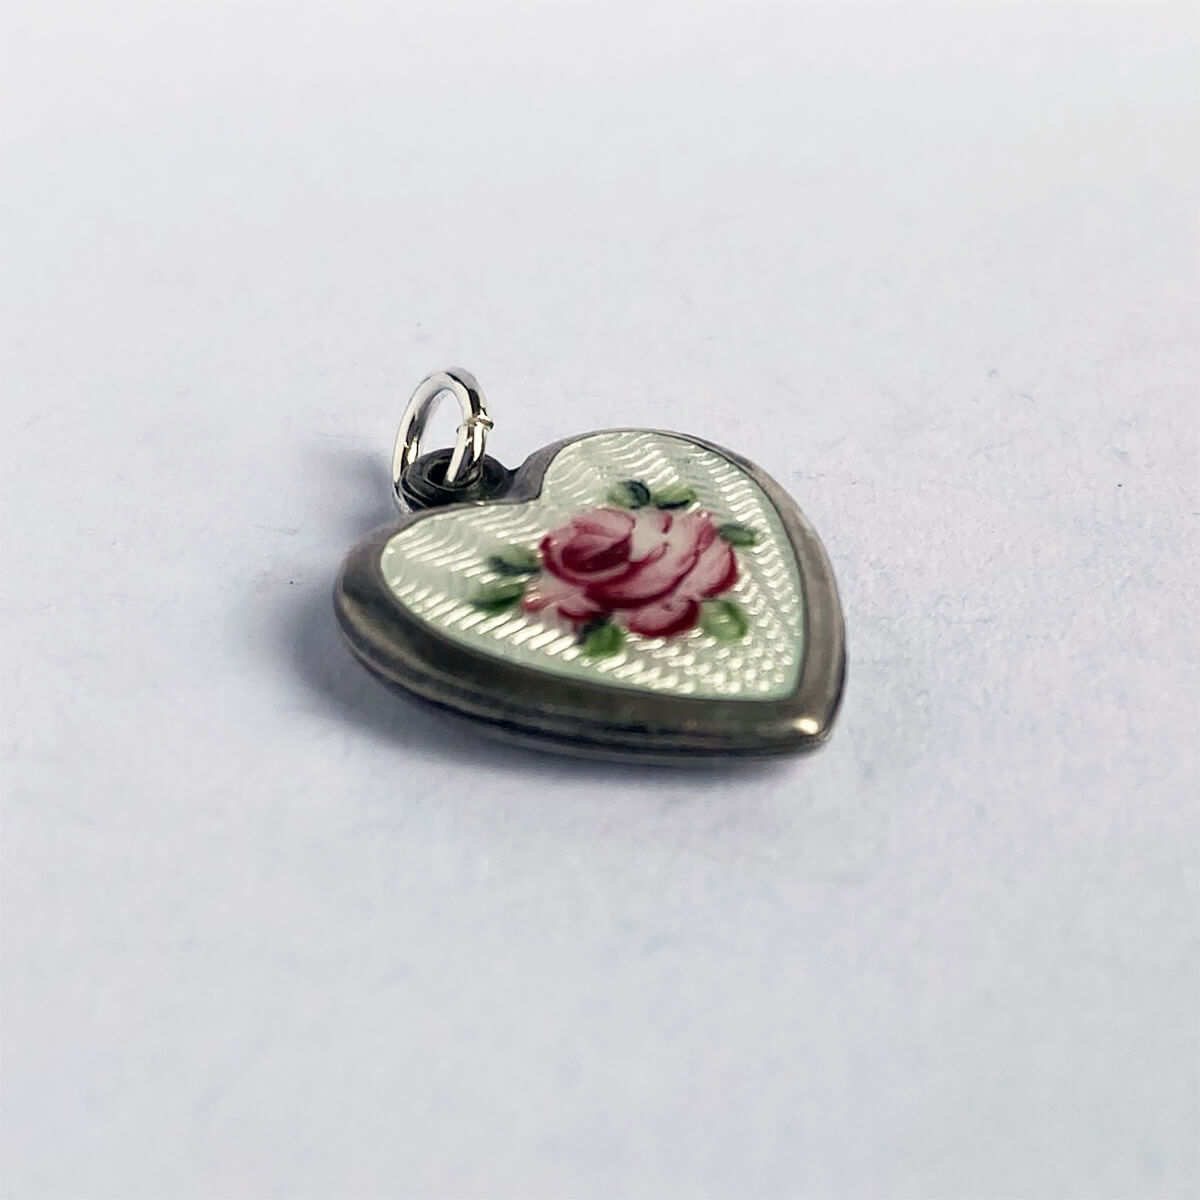 Love heart charm guilloche enamel with pink rose flower